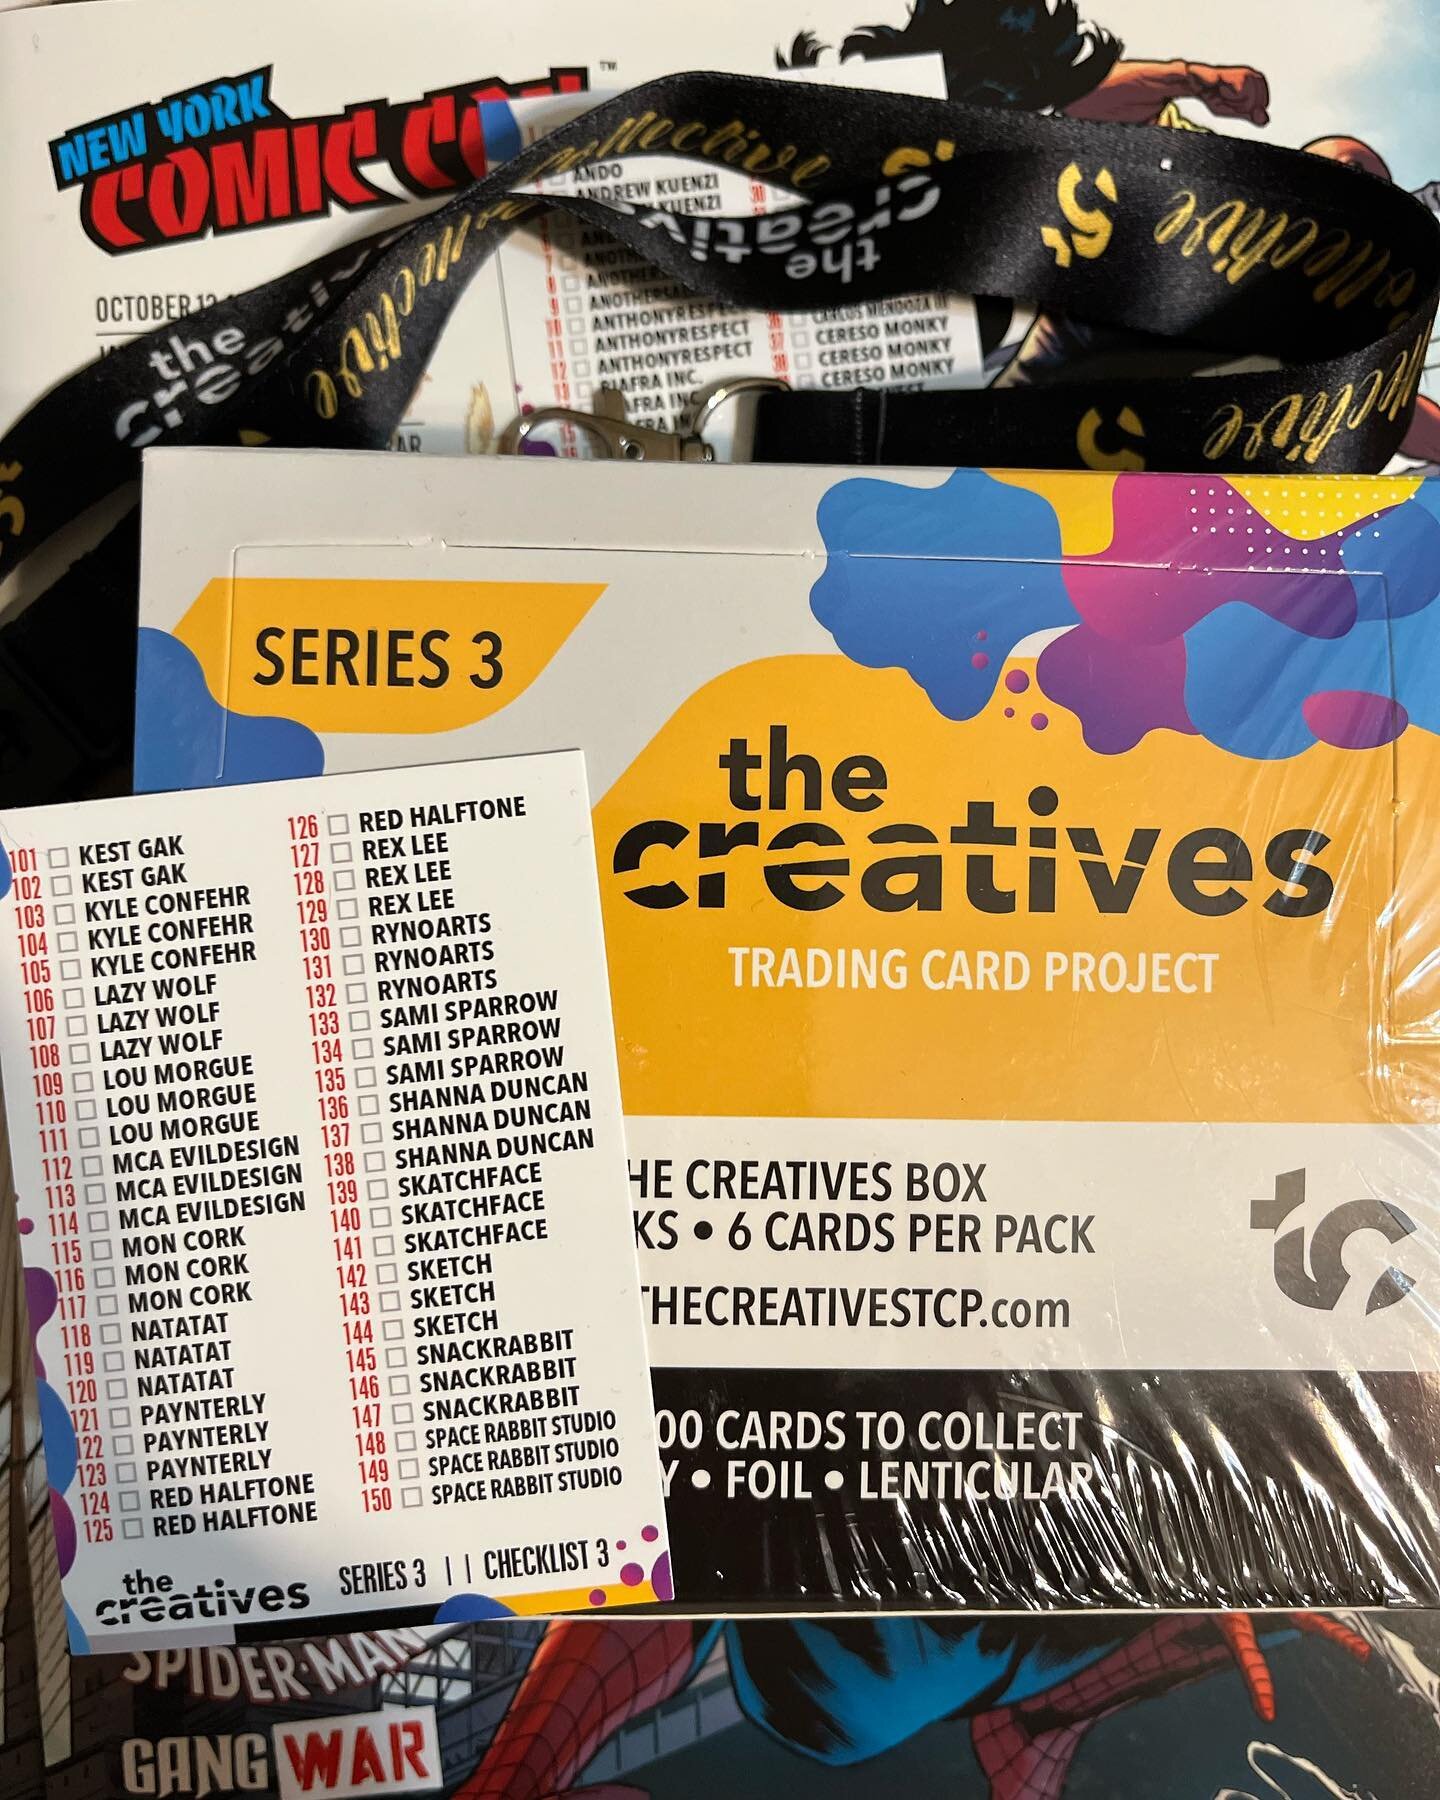 Stop by @thecreativestcp at @newyorkcomiccon to pick up packs and boxes of SERIES 3, featuring @lou_criticalhit !!!!
#NYCC2023 #zappcomics #loumorgue